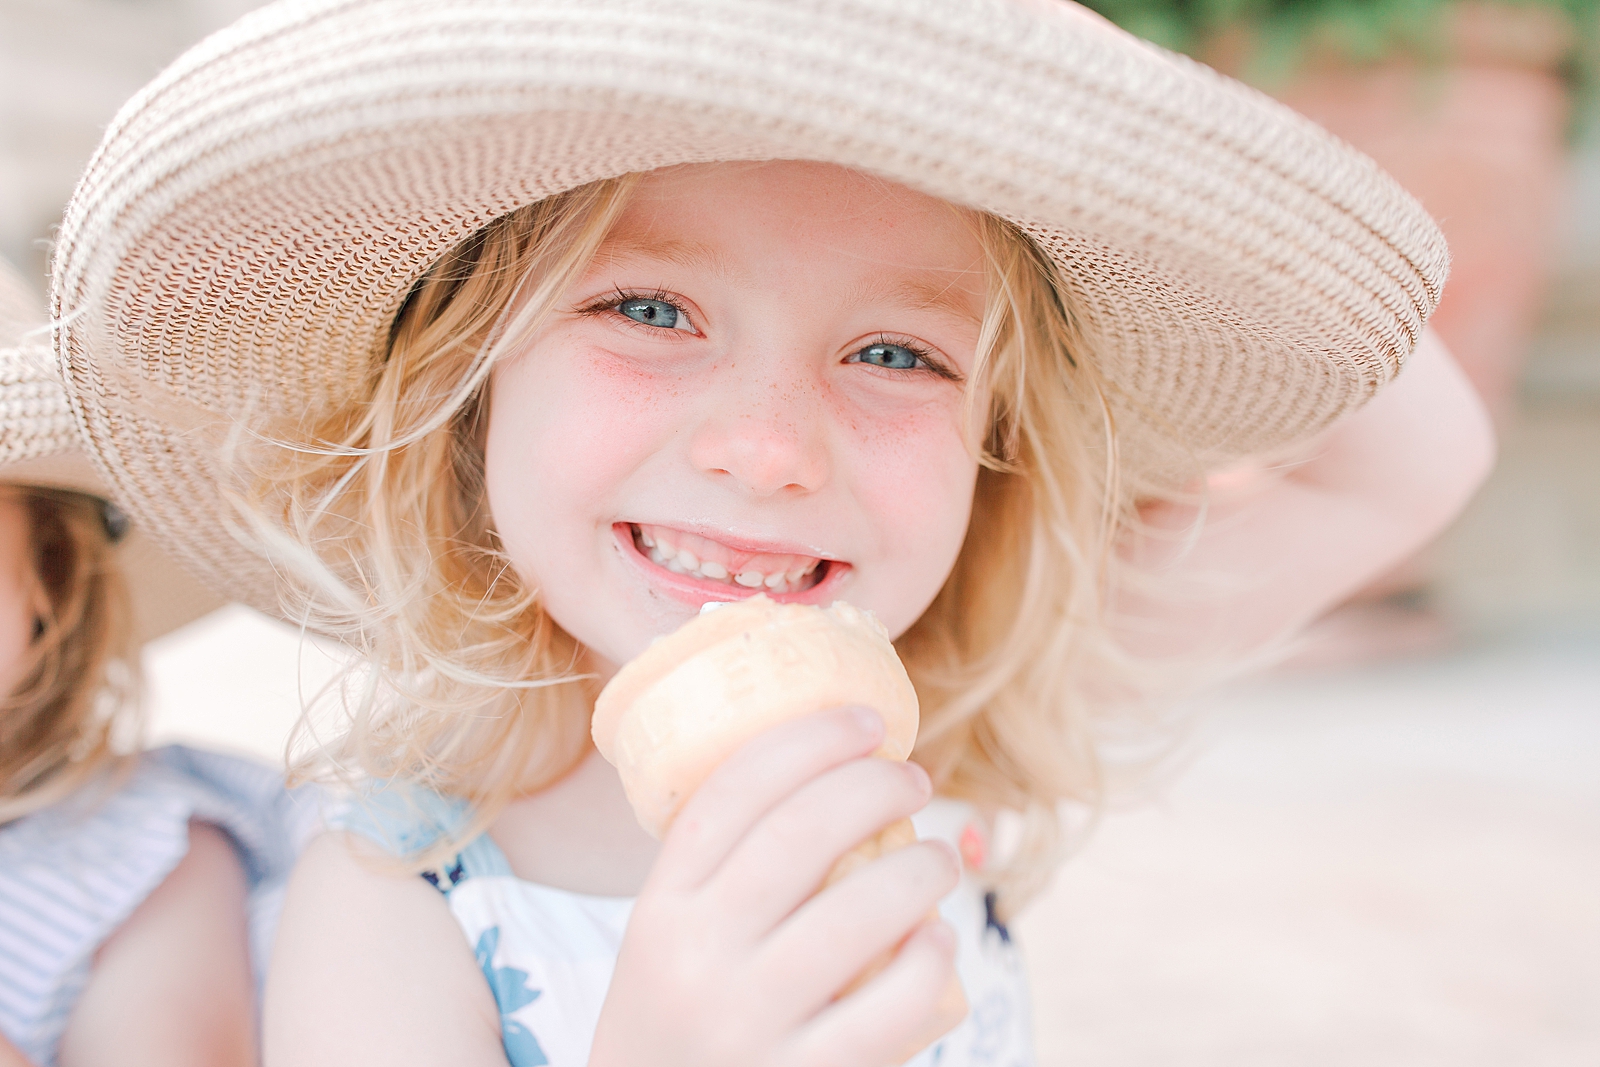 Biltmore House and Gardens little girl smiling holding hat eating ice cream Photo